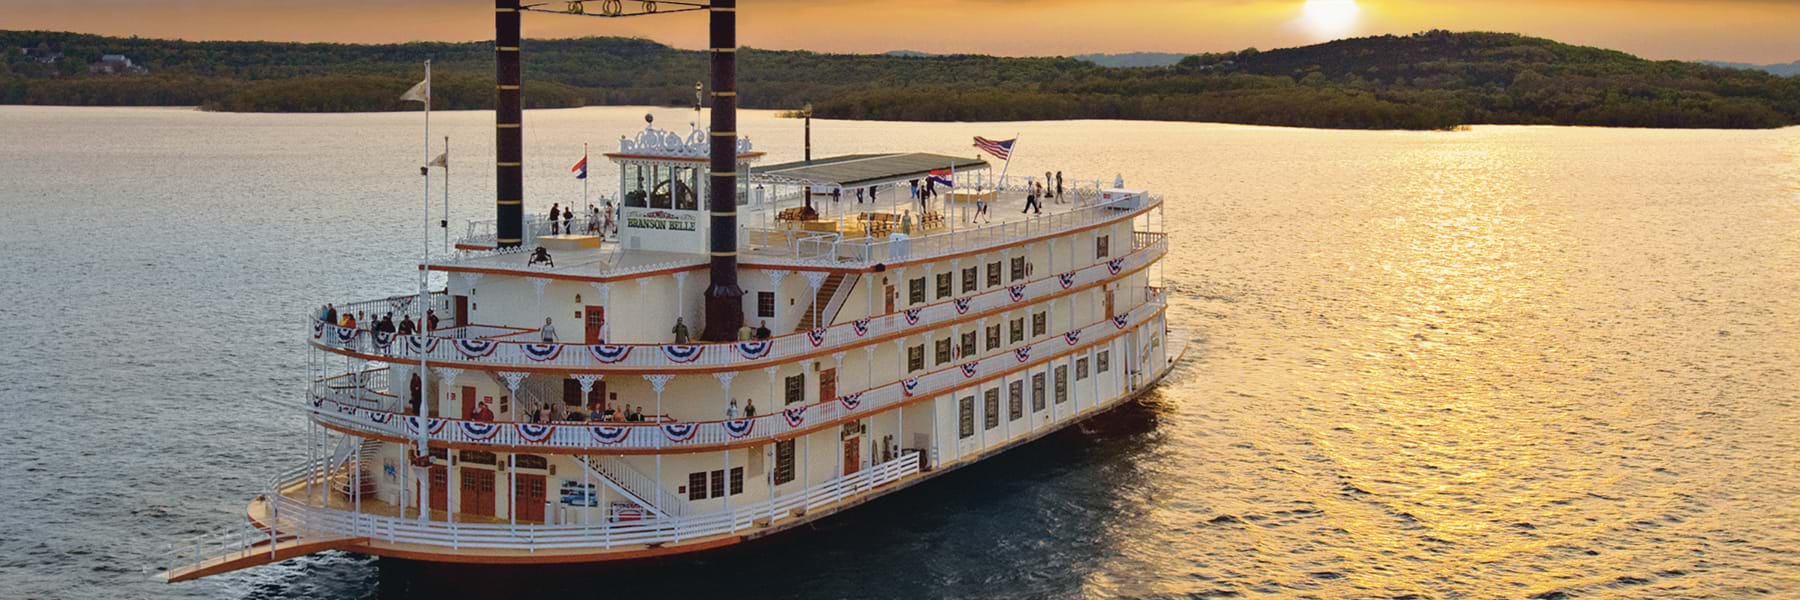 Experience the best of Branson